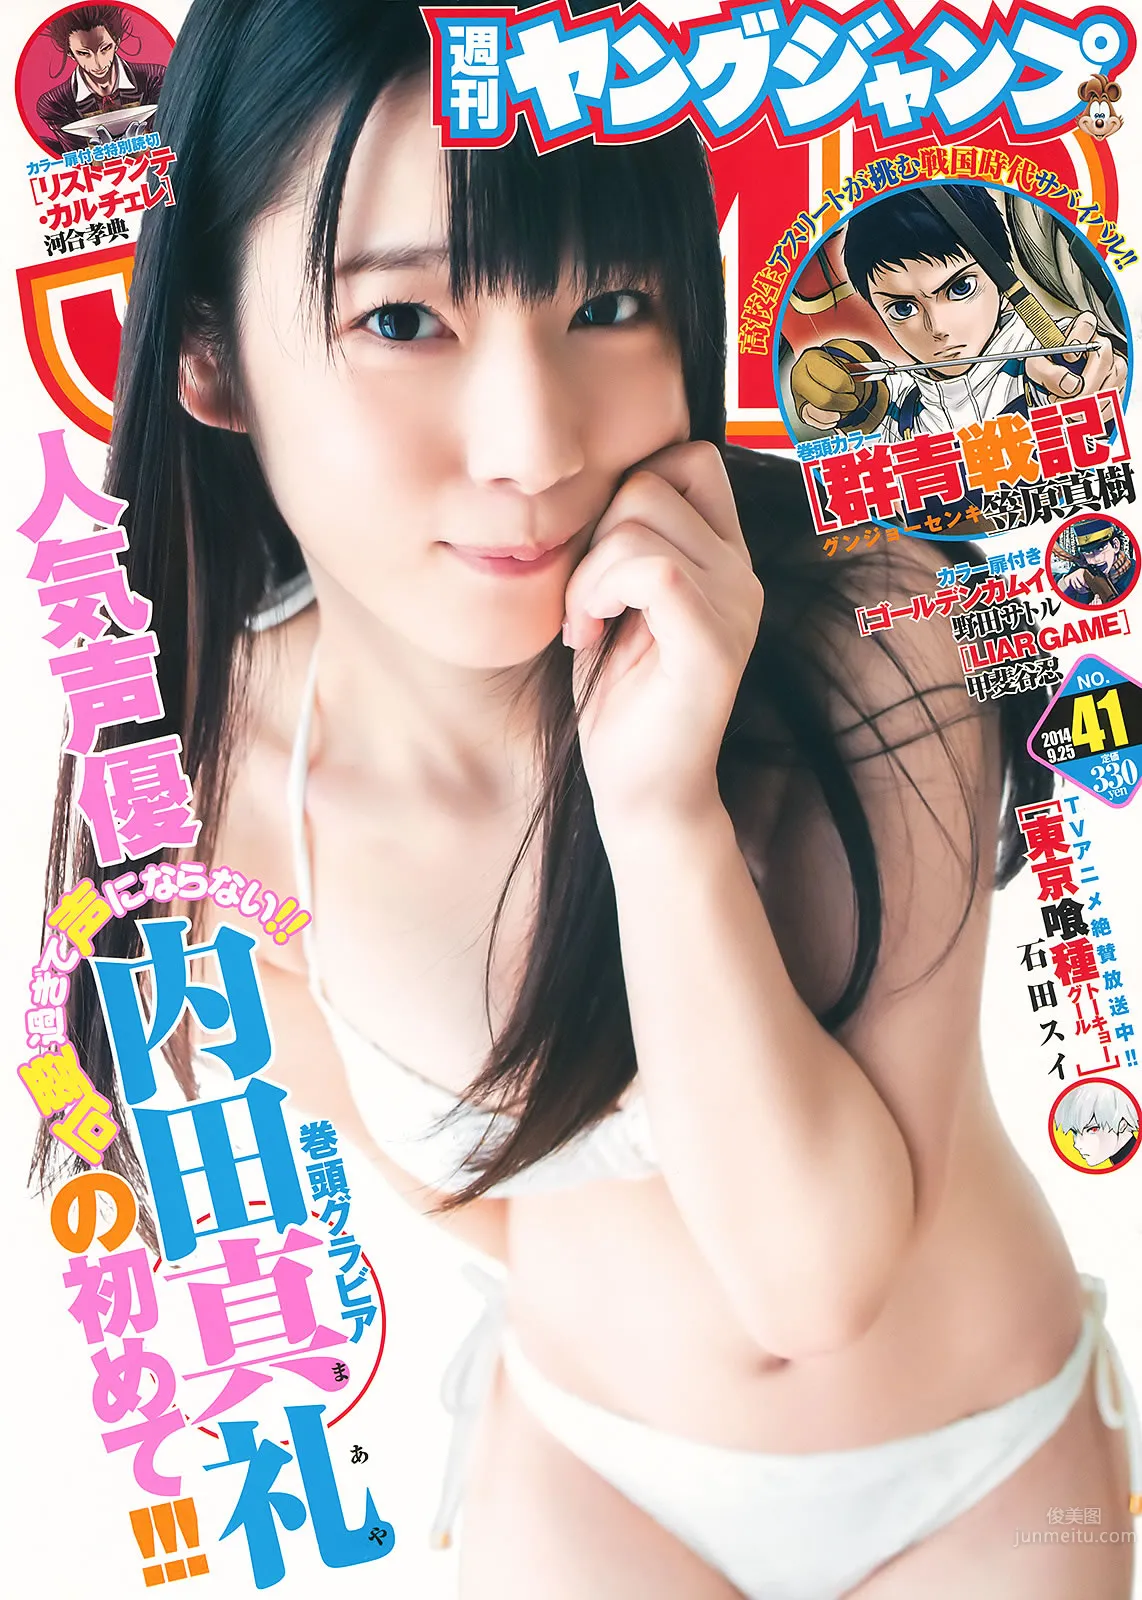 [Weekly Young Jump] 2014 No.40 41 新川优爱 フェアリーズ 内田真礼 高松リナ_0